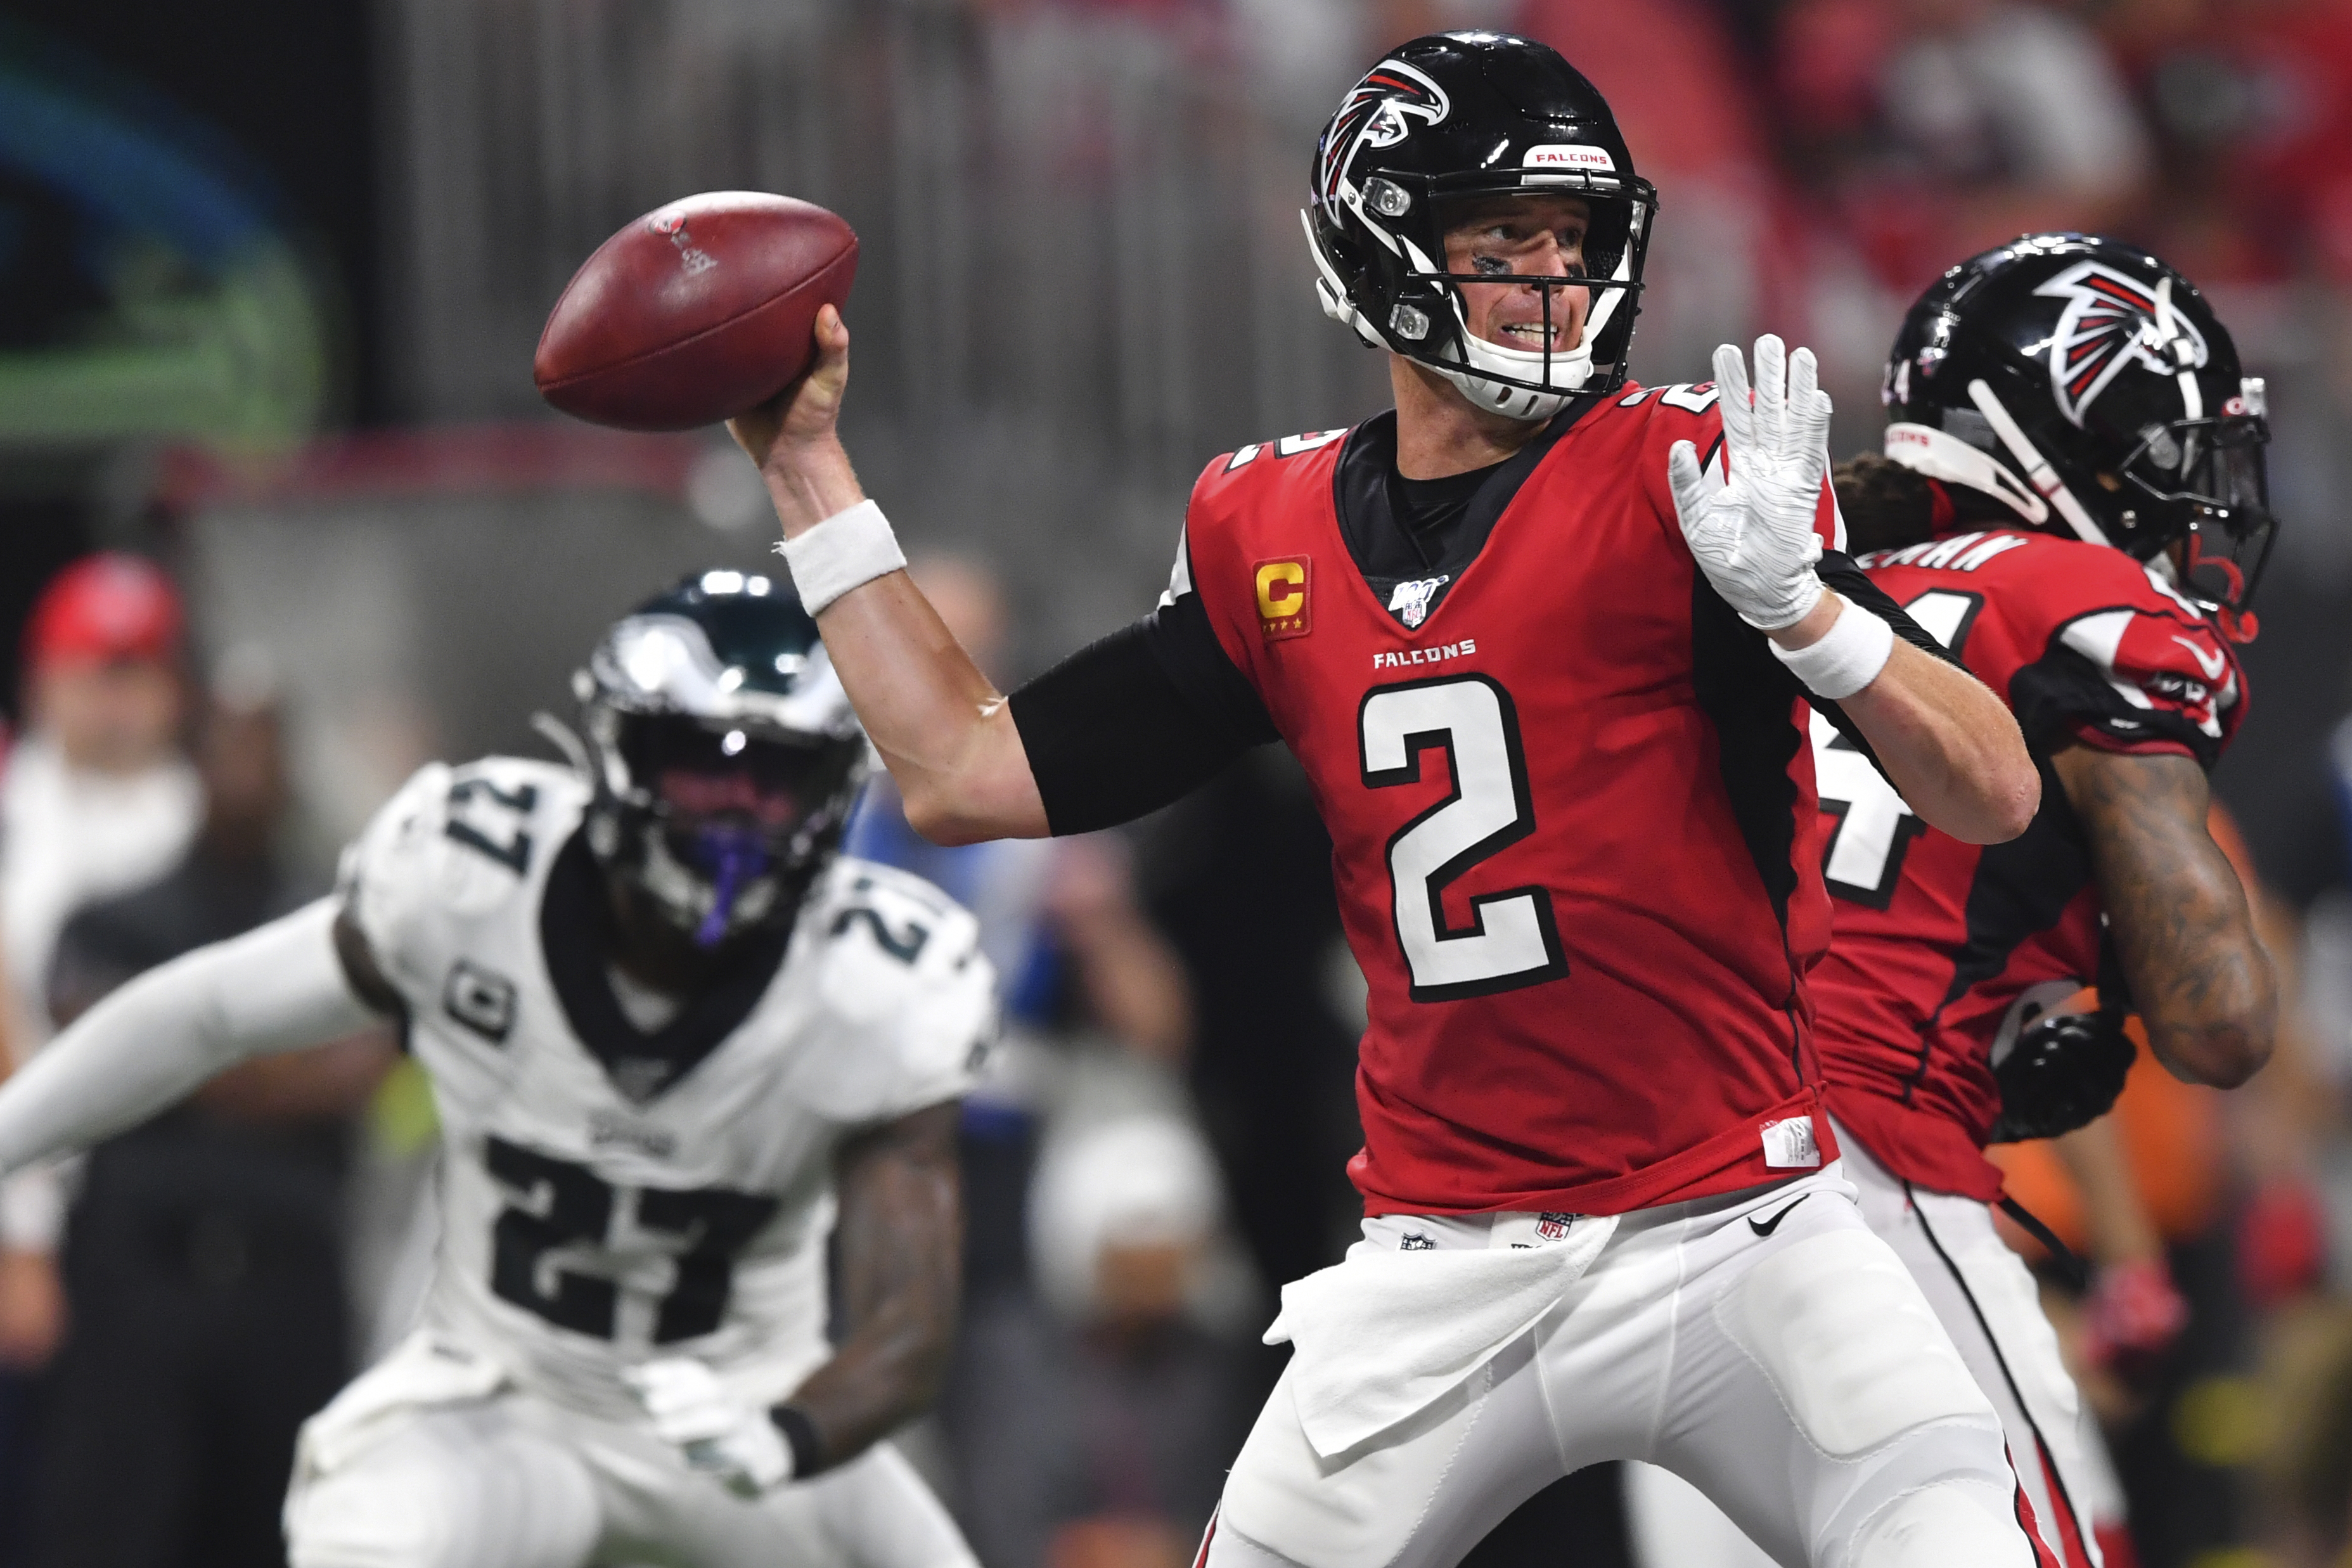 Ryan overcomes 3 interceptions to lead Falcons to first win